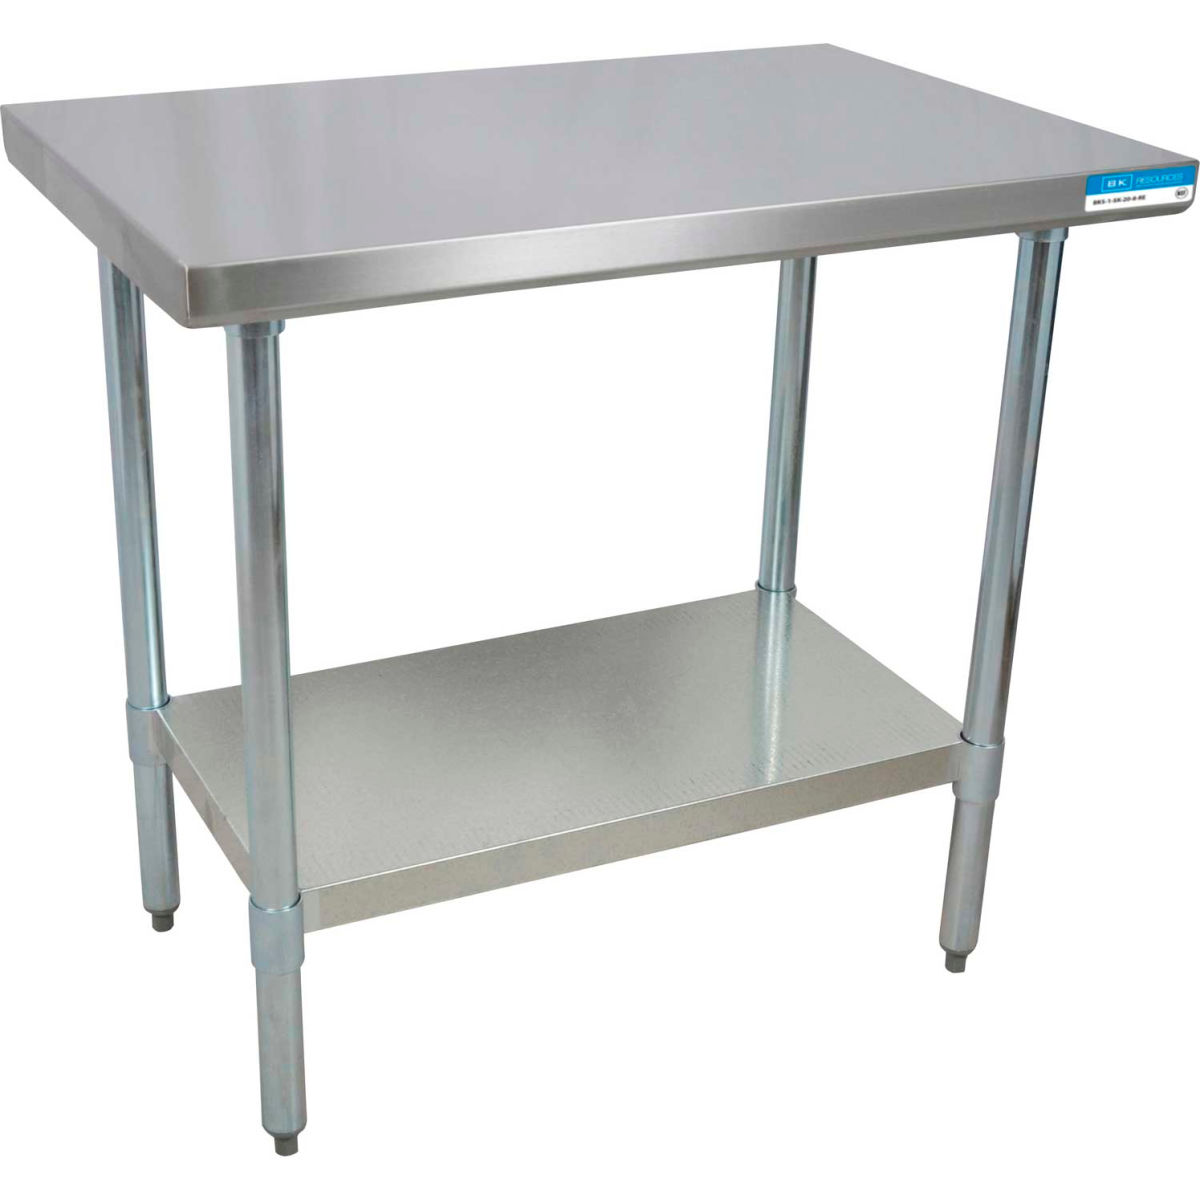 Picture of BK Resources B0899460 18 Gauge 430 Series Stainless & Galvanised Shelf Workbench with Undershelf - 60 x 18 in.